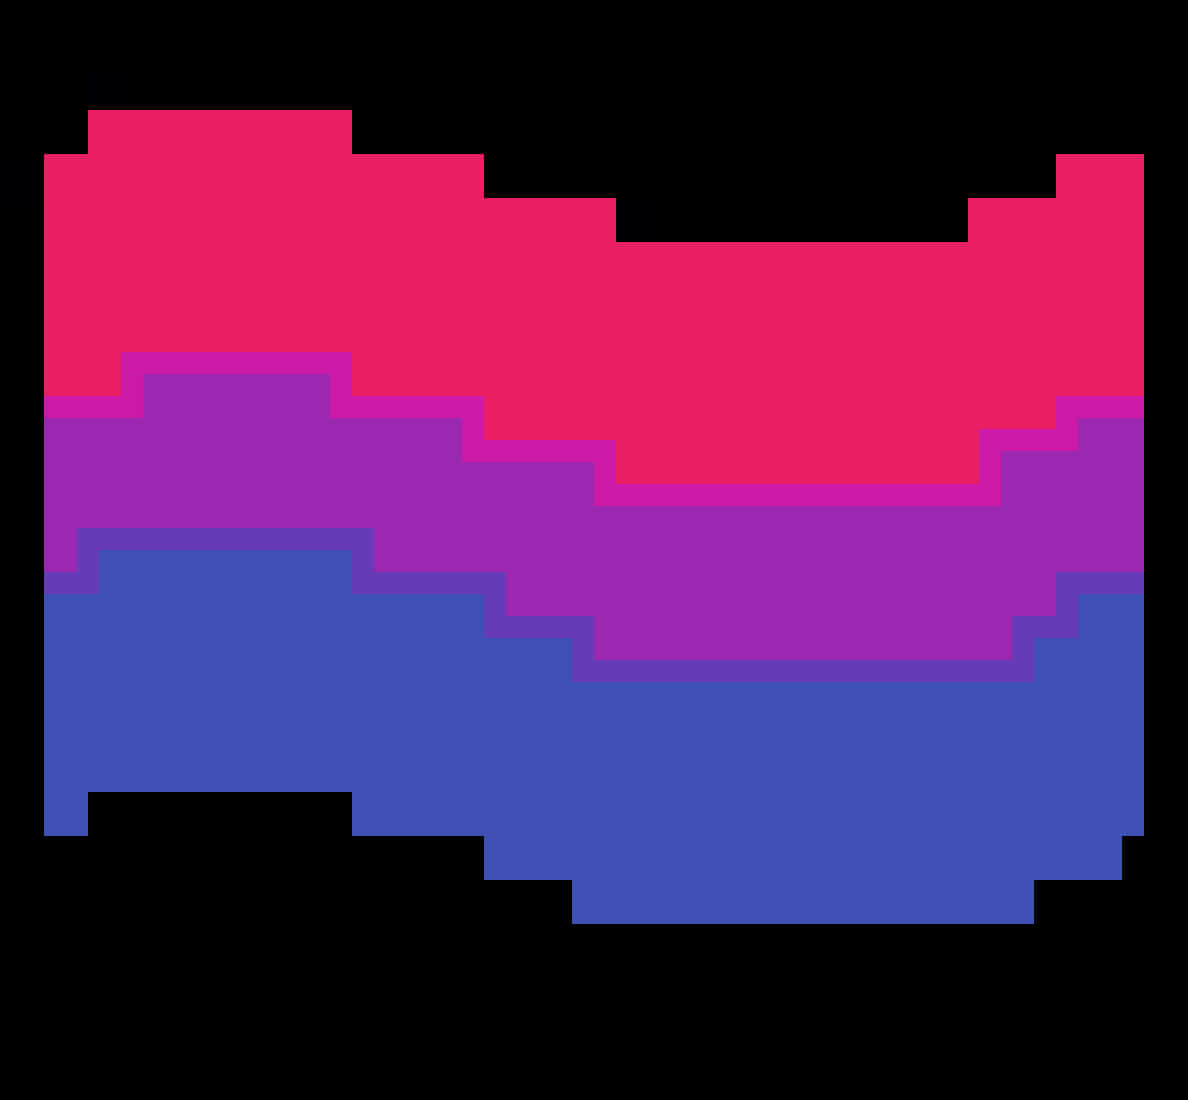 A Pixelated Flag With Different Colors